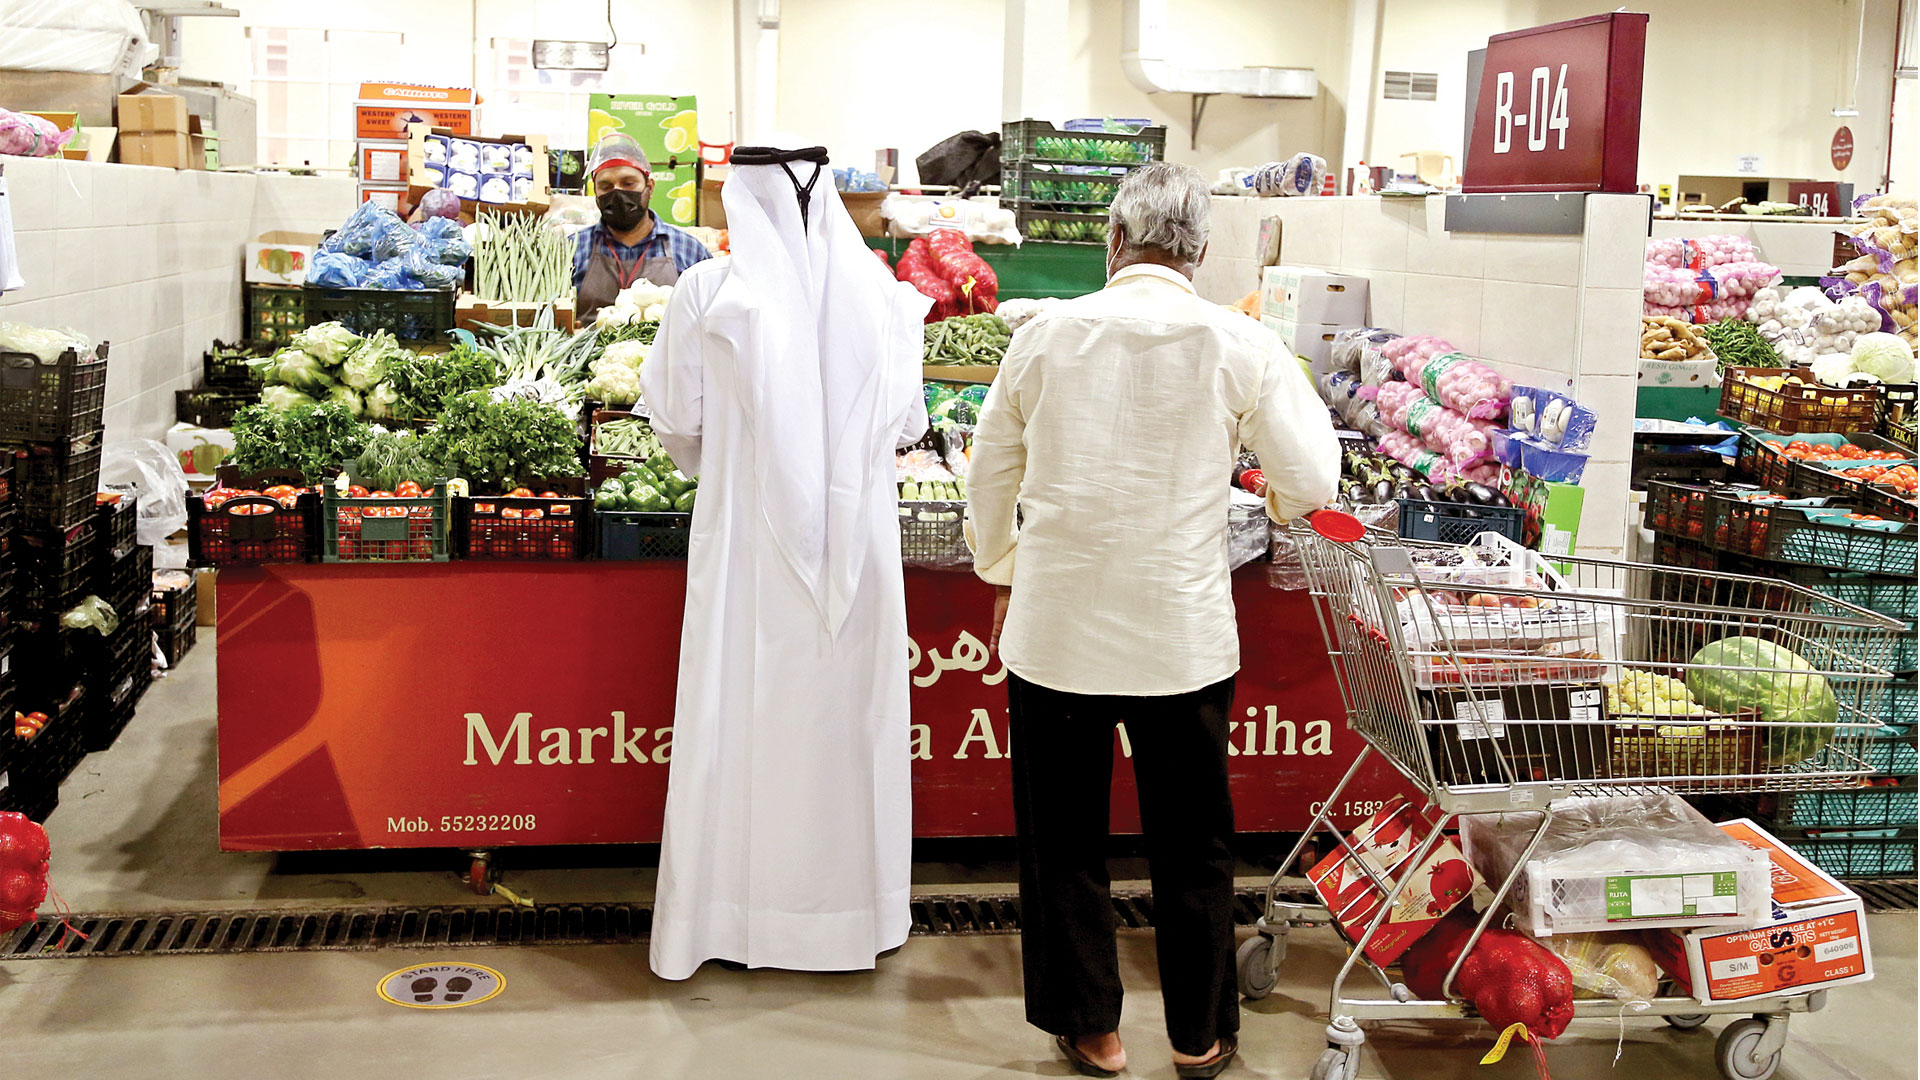 30% increase in vegetable prices in Sailiya Central Market